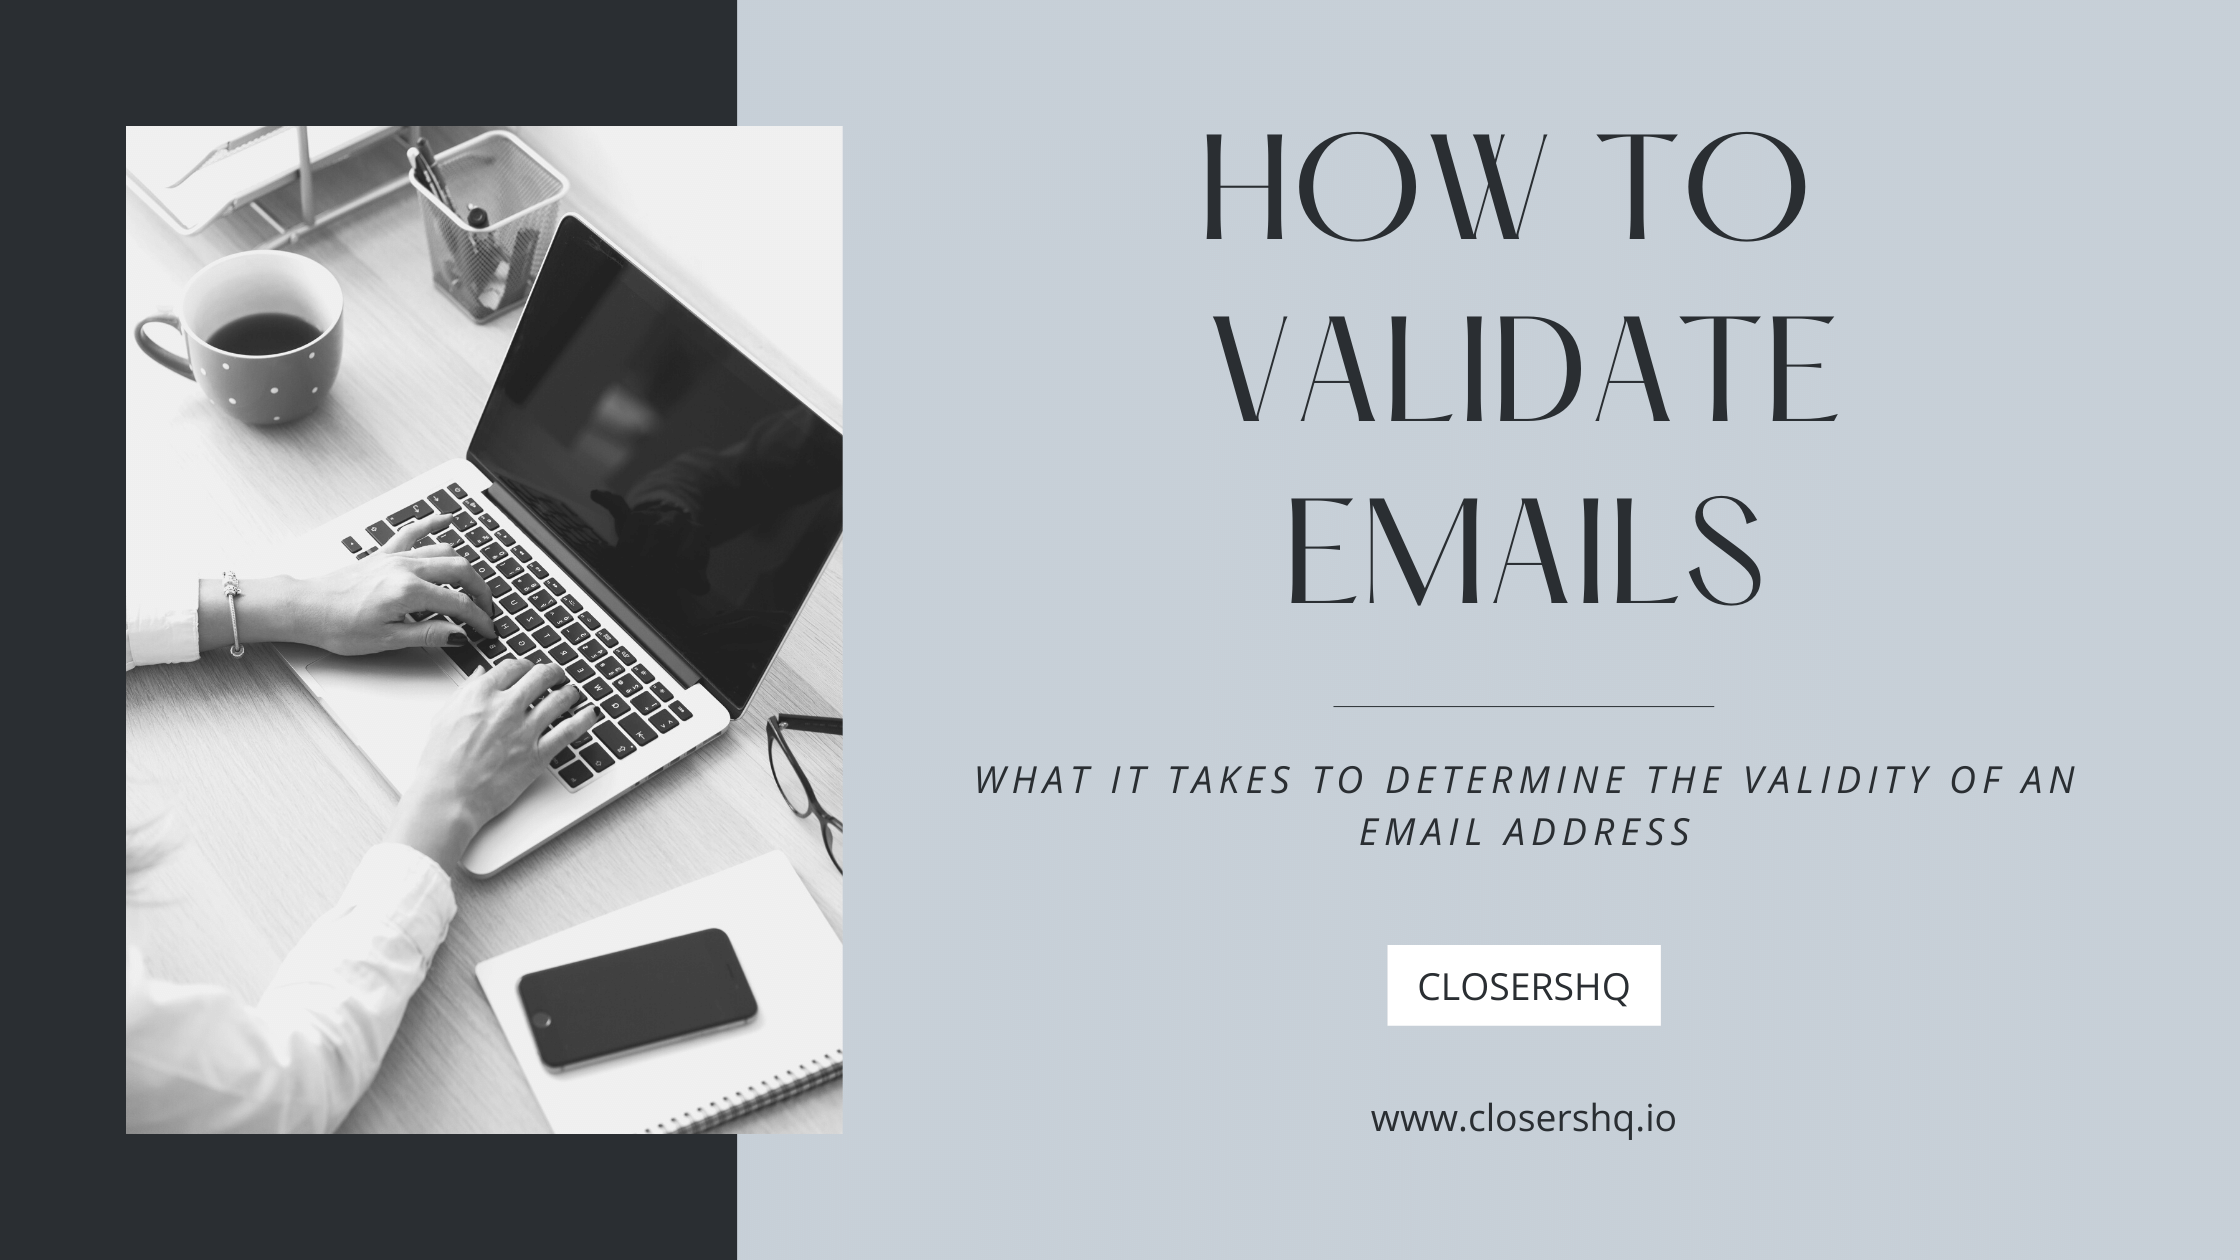 Email Validation: Why Should We Care About Validating Emails?